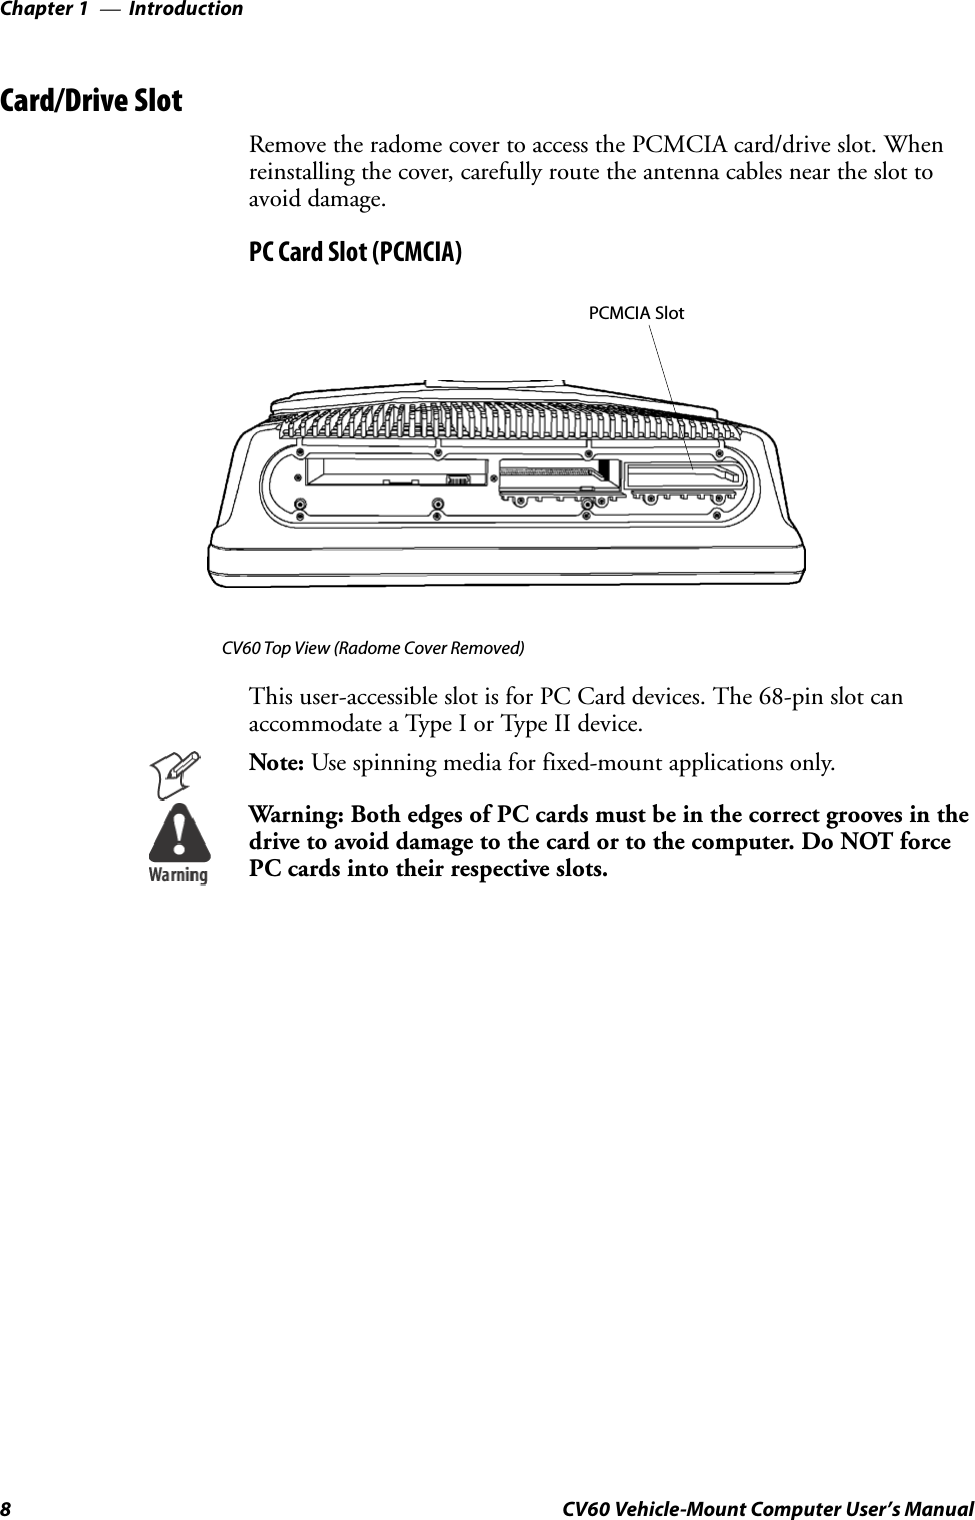 IntroductionChapter —18 CV60 Vehicle-Mount Computer User’s ManualCard/Drive SlotRemovetheradomecovertoaccessthePCMCIAcard/driveslot.Whenreinstalling the cover, carefully route the antenna cables near the slot toavoid damage.PC Card Slot (PCMCIA)PCMCIA SlotCV60 Top View (Radome Cover Removed)This user-accessible slot is for PC Card devices. The 68-pin slot canaccommodate a Type I or Type II device.Note: Use spinning media for fixed-mount applications only.Warning: Both edges of PC cards must be in the correct grooves in thedrivetoavoiddamagetothecardortothecomputer.DoNOTforcePC cards into their respective slots.